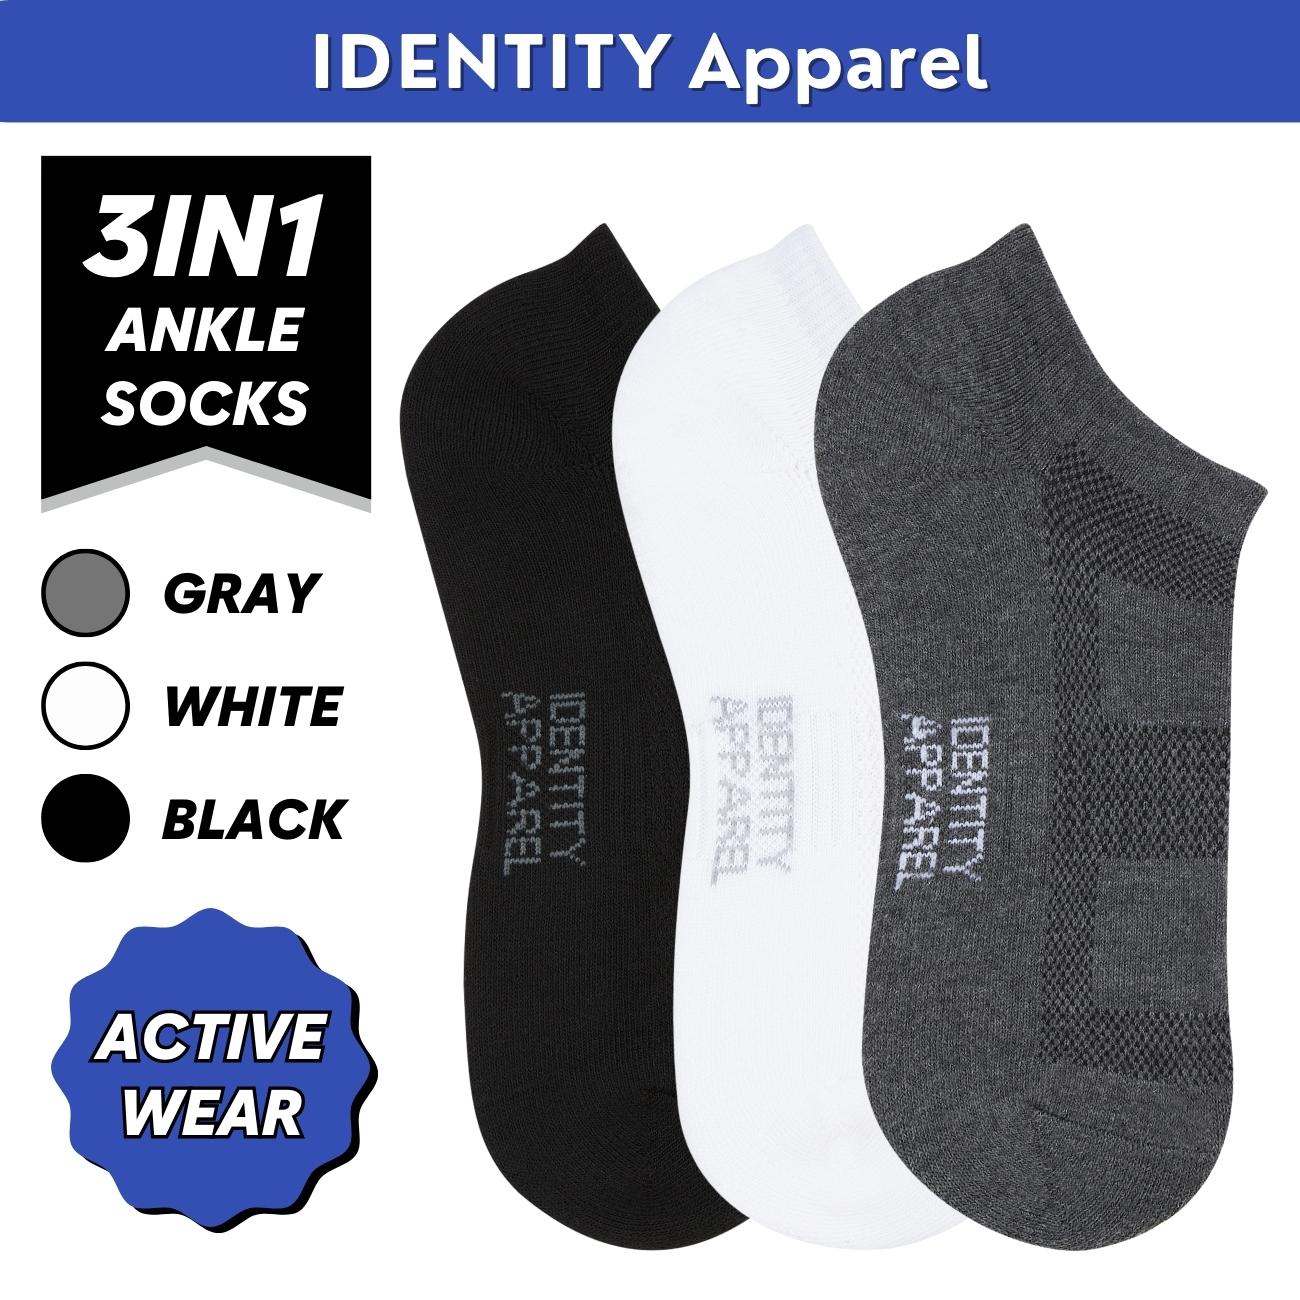 IDENTITY Apparel Performance Enhancing Moisture-Wicking Active Wear Ankle Length Socks